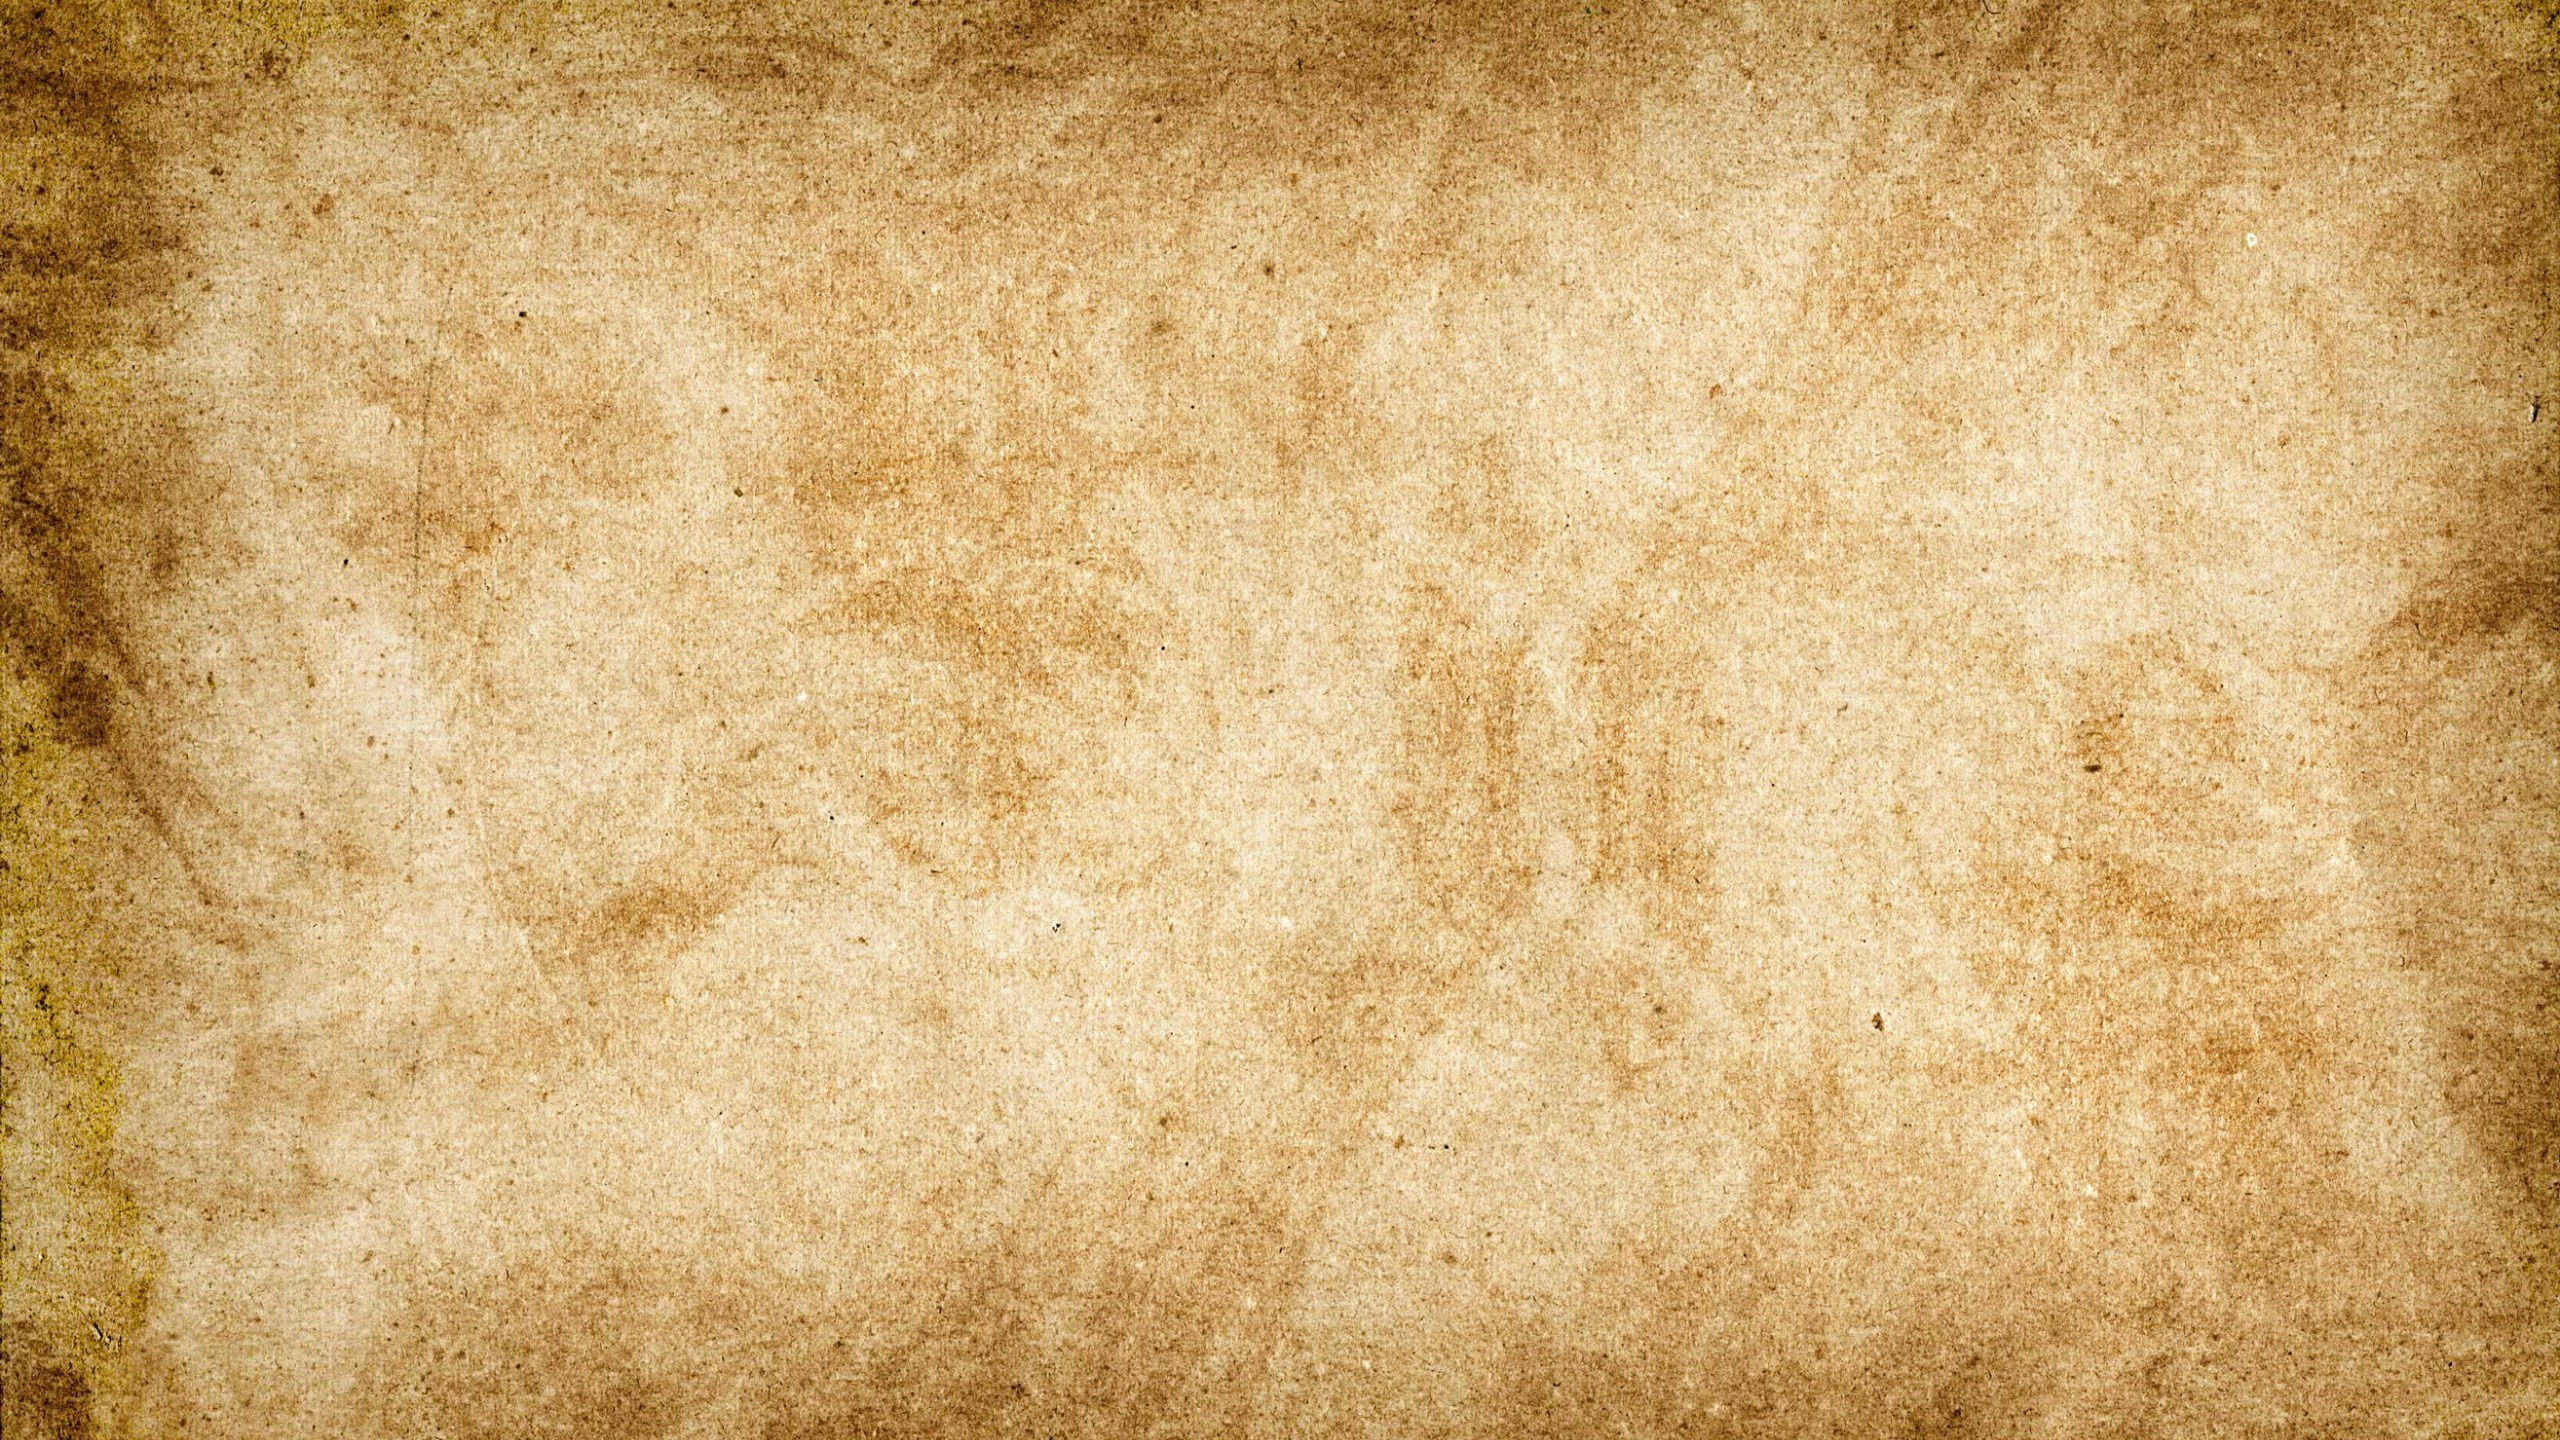 Brown Textile on Brown Wooden Table. Wallpaper in 2560x1440 Resolution